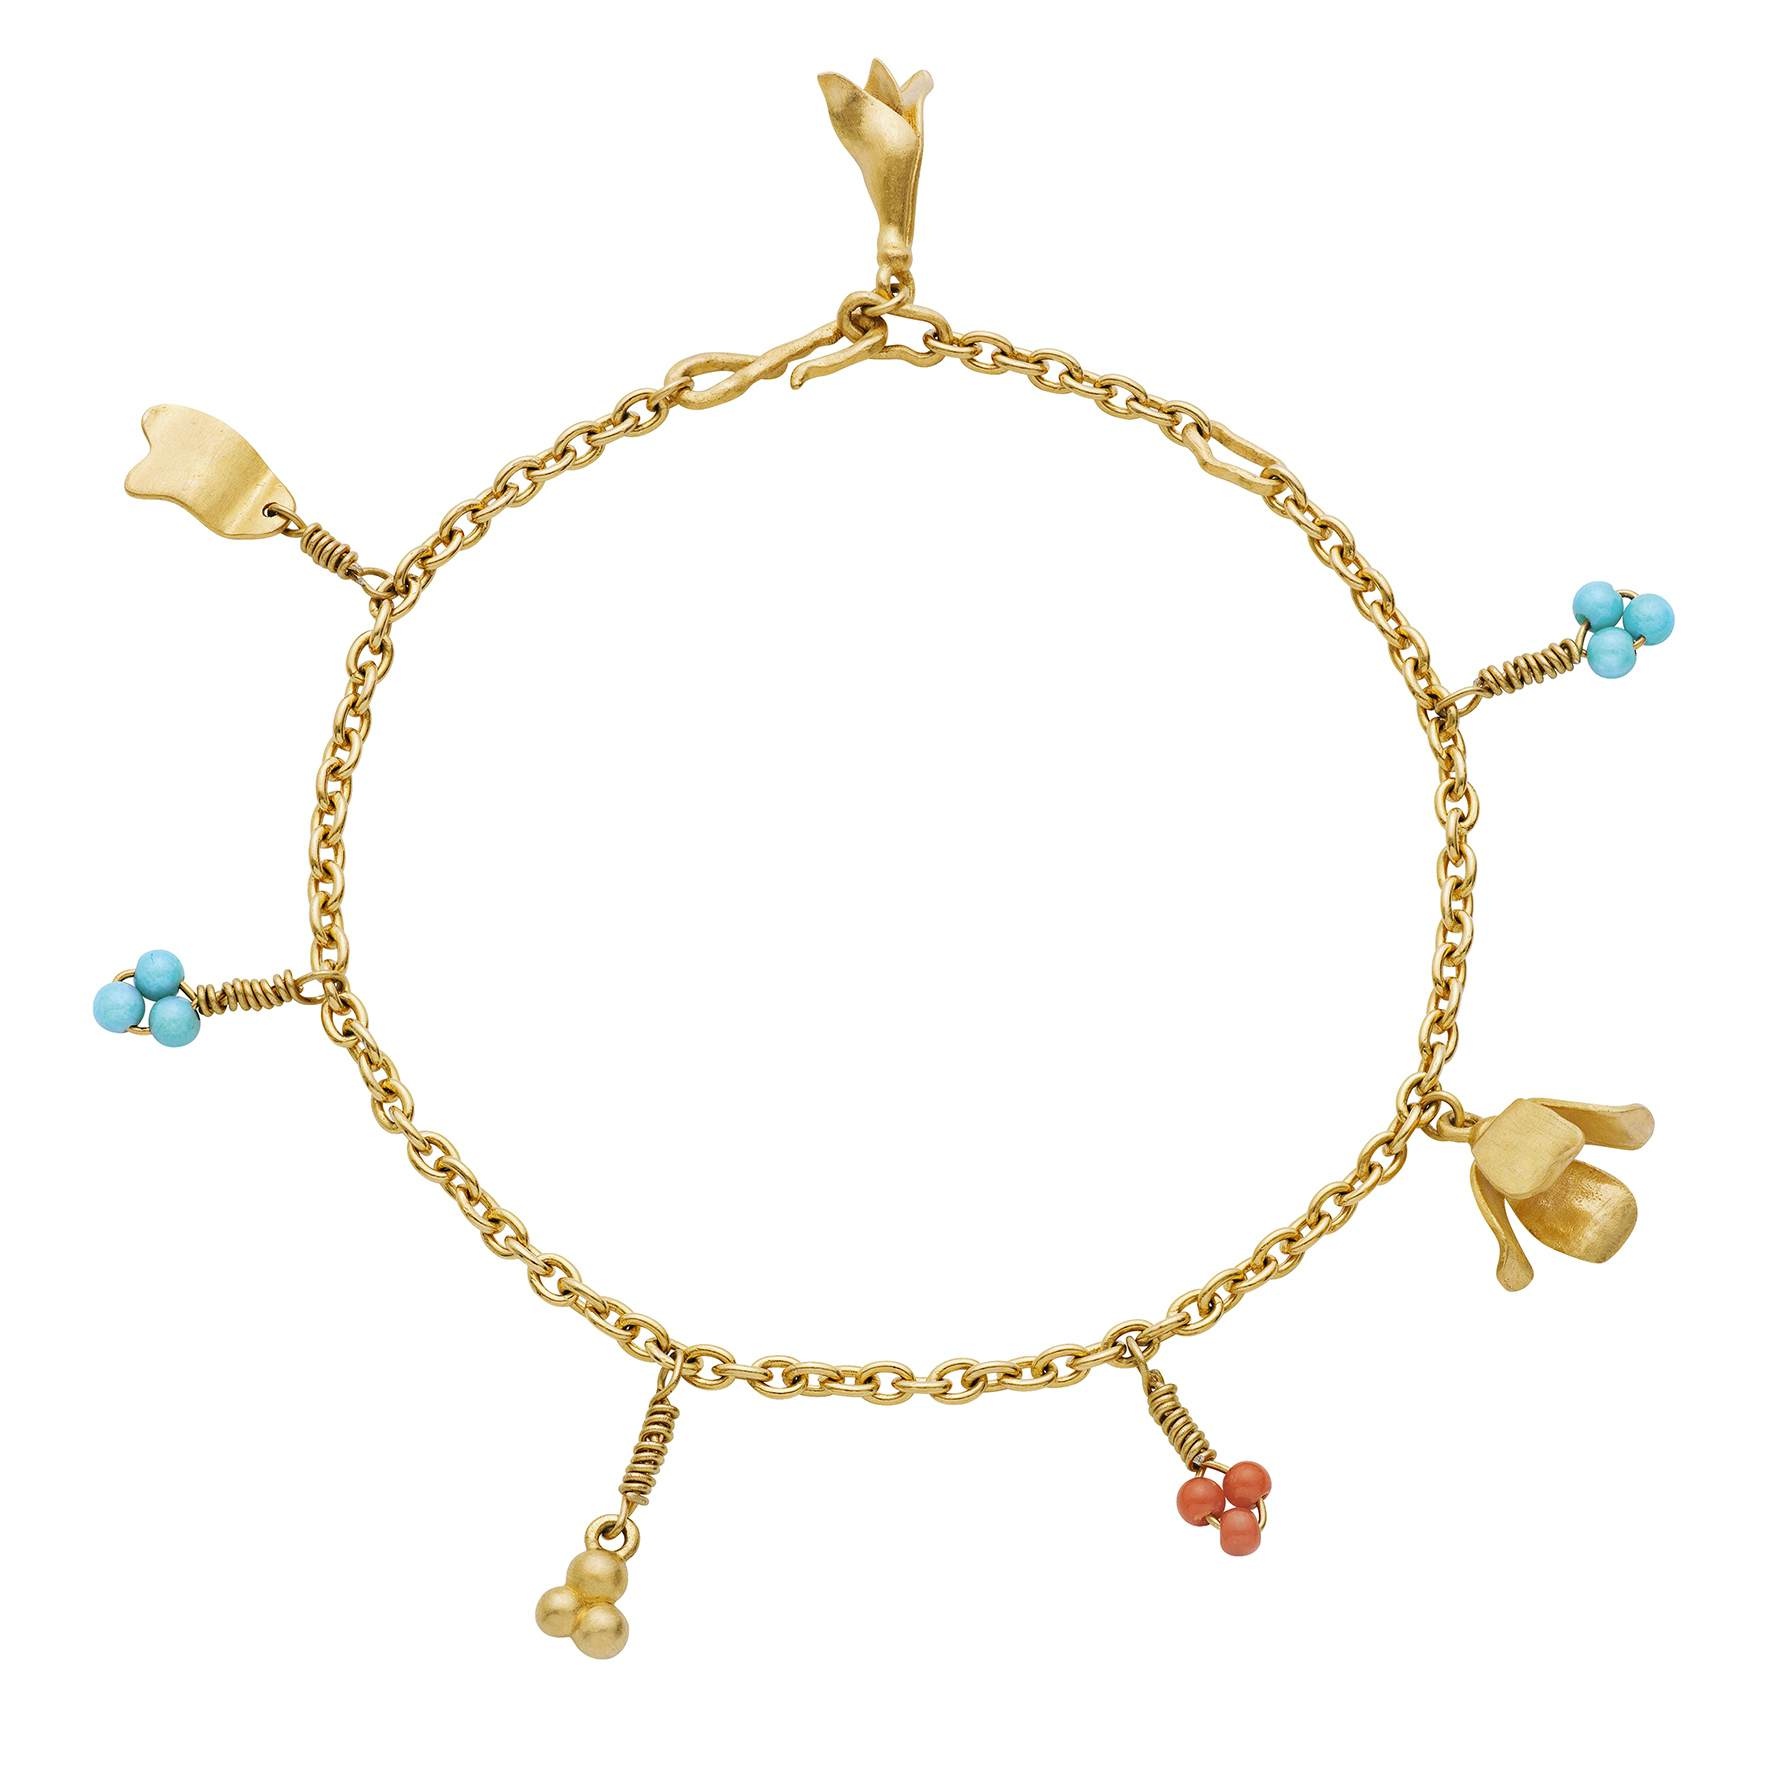 Daisy Bracelet from Maanesten in Goldplated-Silver Sterling 925| Coral,Turquoise